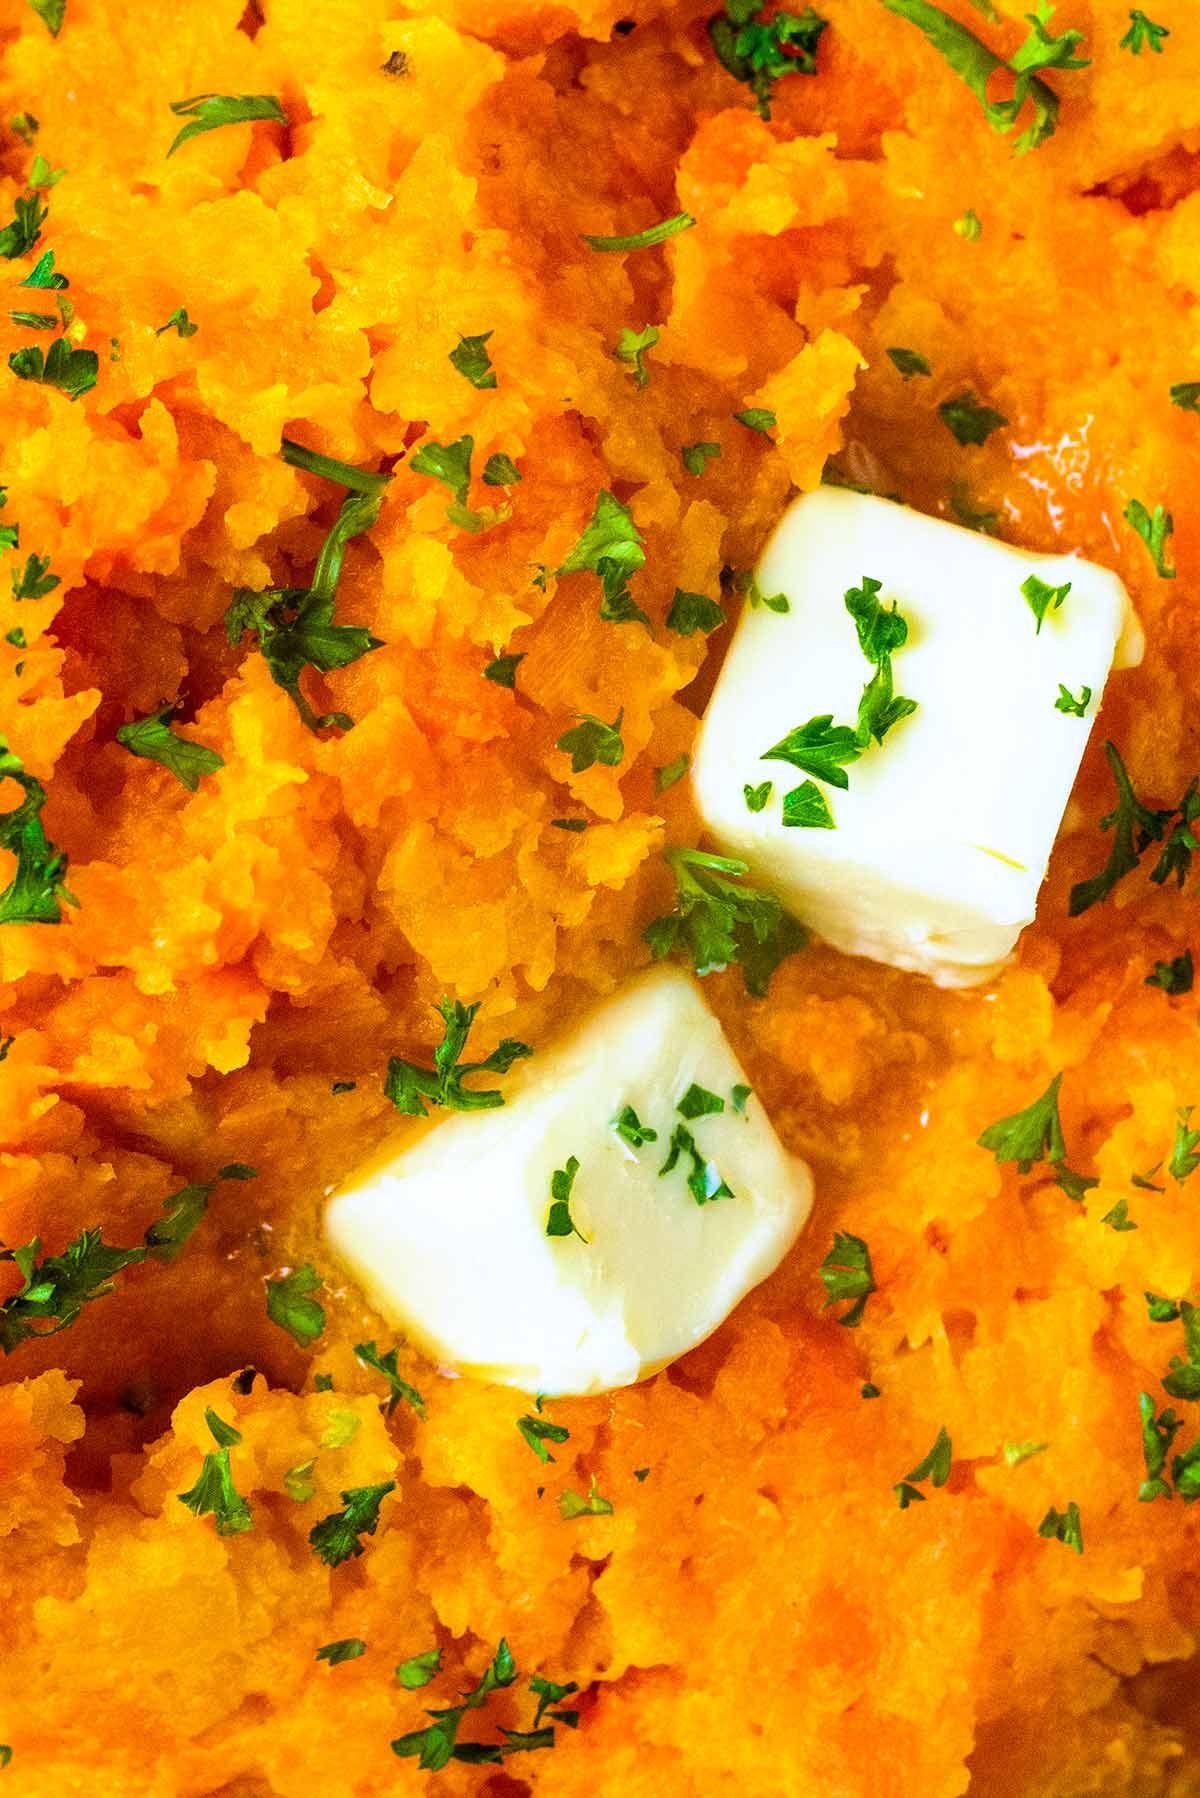 Two pats of butter melting on some carrot mash.